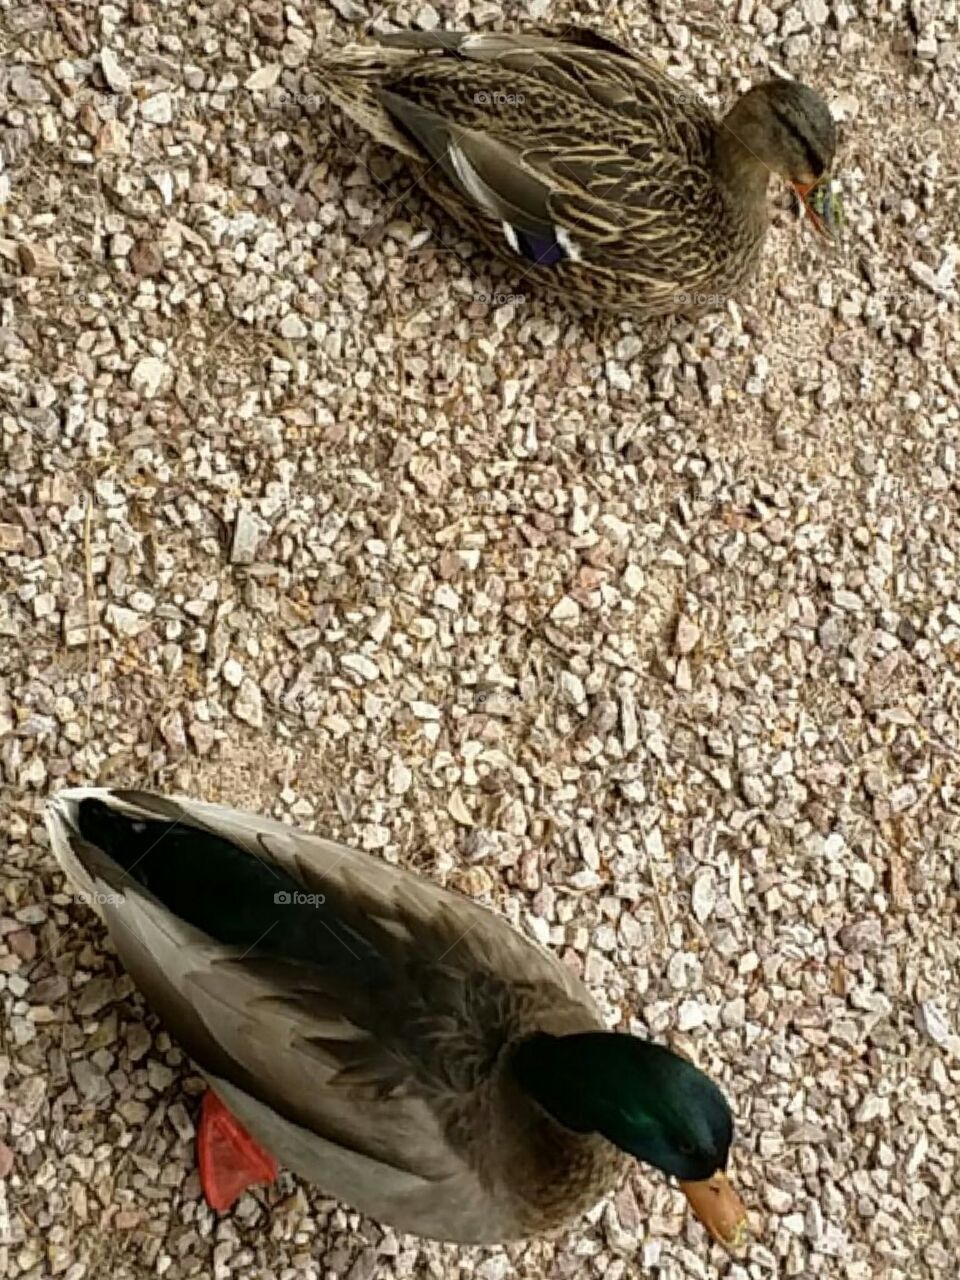 Our Yearly Ducks. These Ducks Faithfully Come Back Every Year